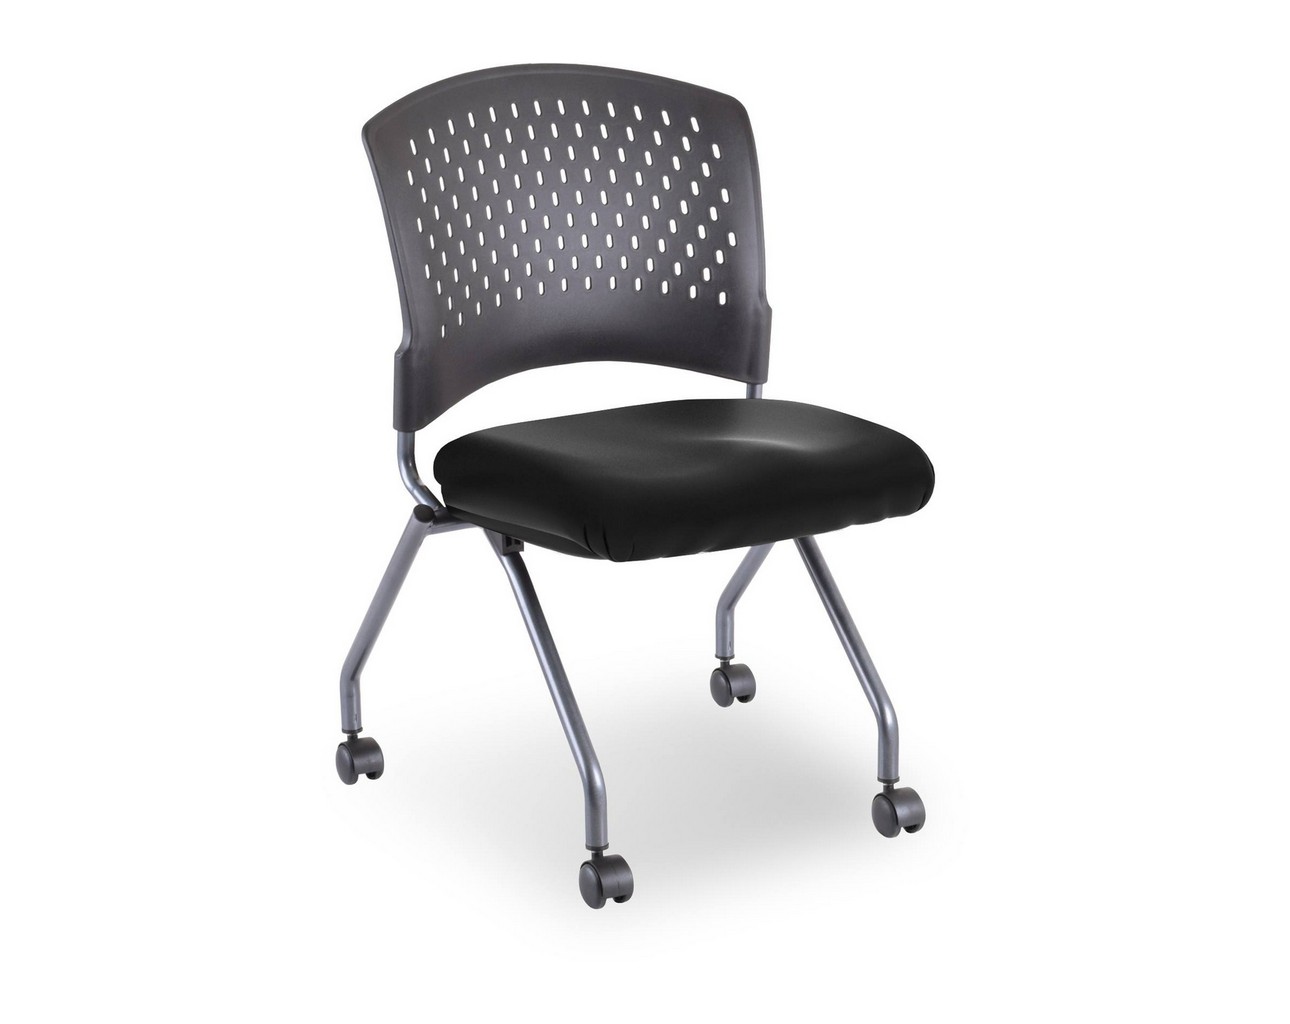 Agenda II Nesting Chair Without Arms – Black Vinyl SKU 3274T